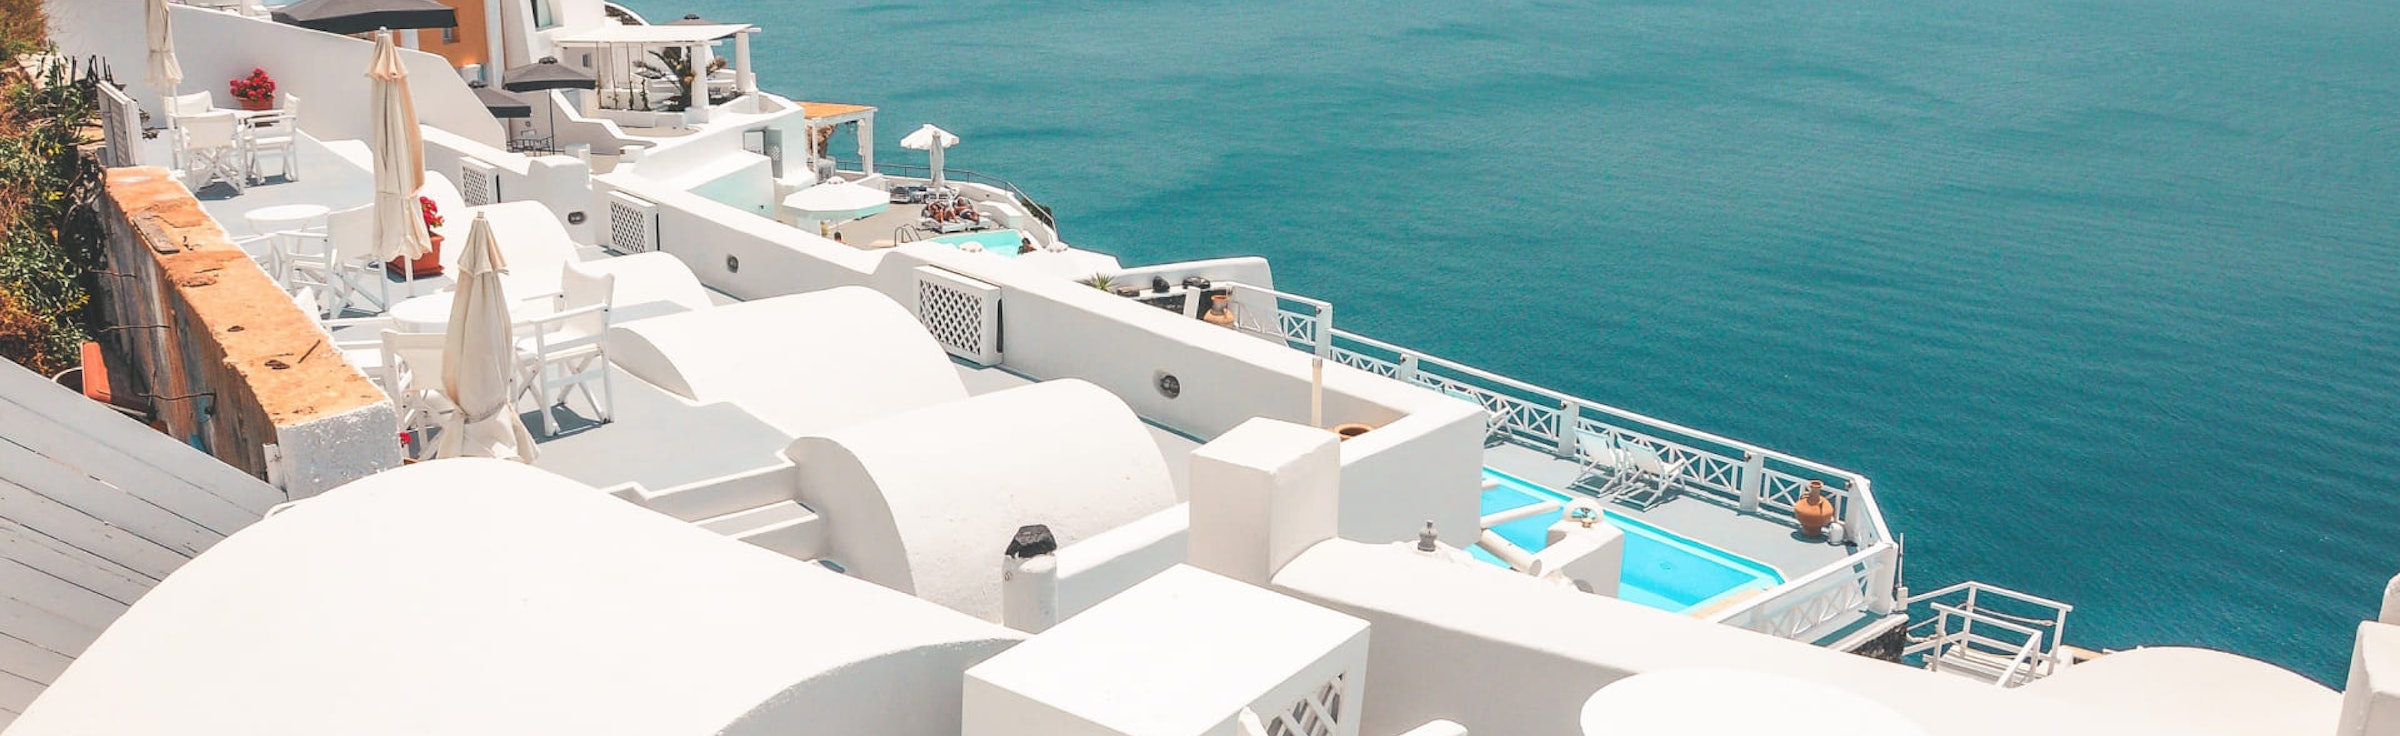 Mykonos Tour Packages from Mumbai